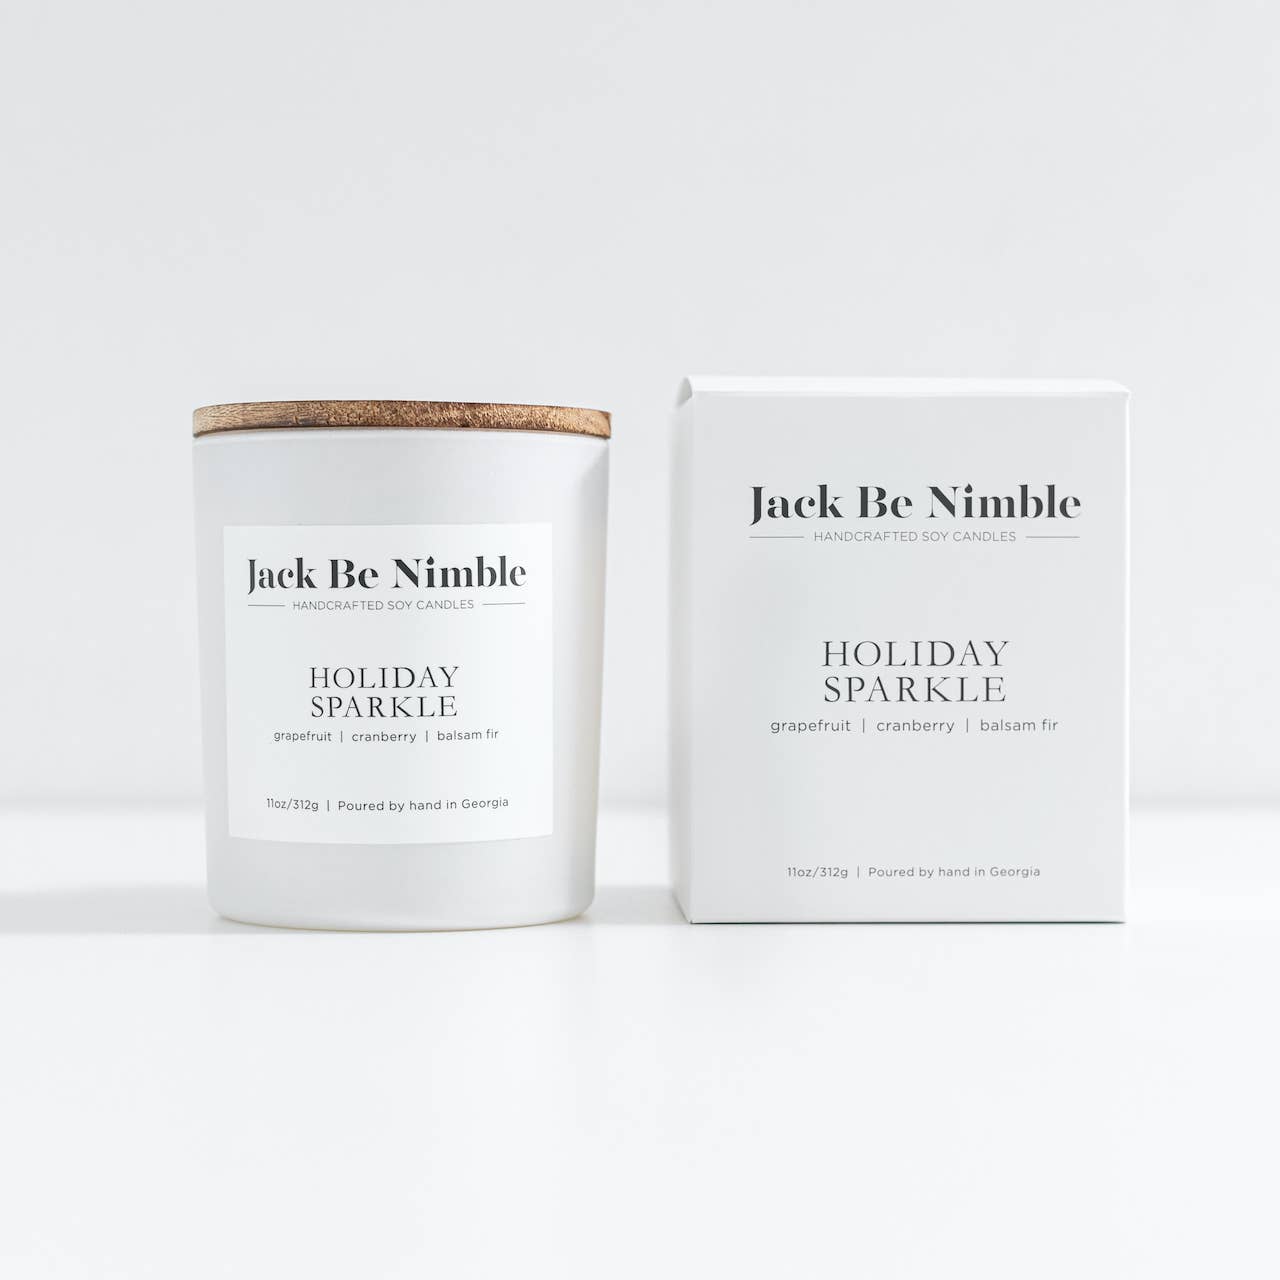 Jack Be Nimble Candles - 11oz Holiday Sparkle Soy Candle - Addie Rose Boutique - Austin